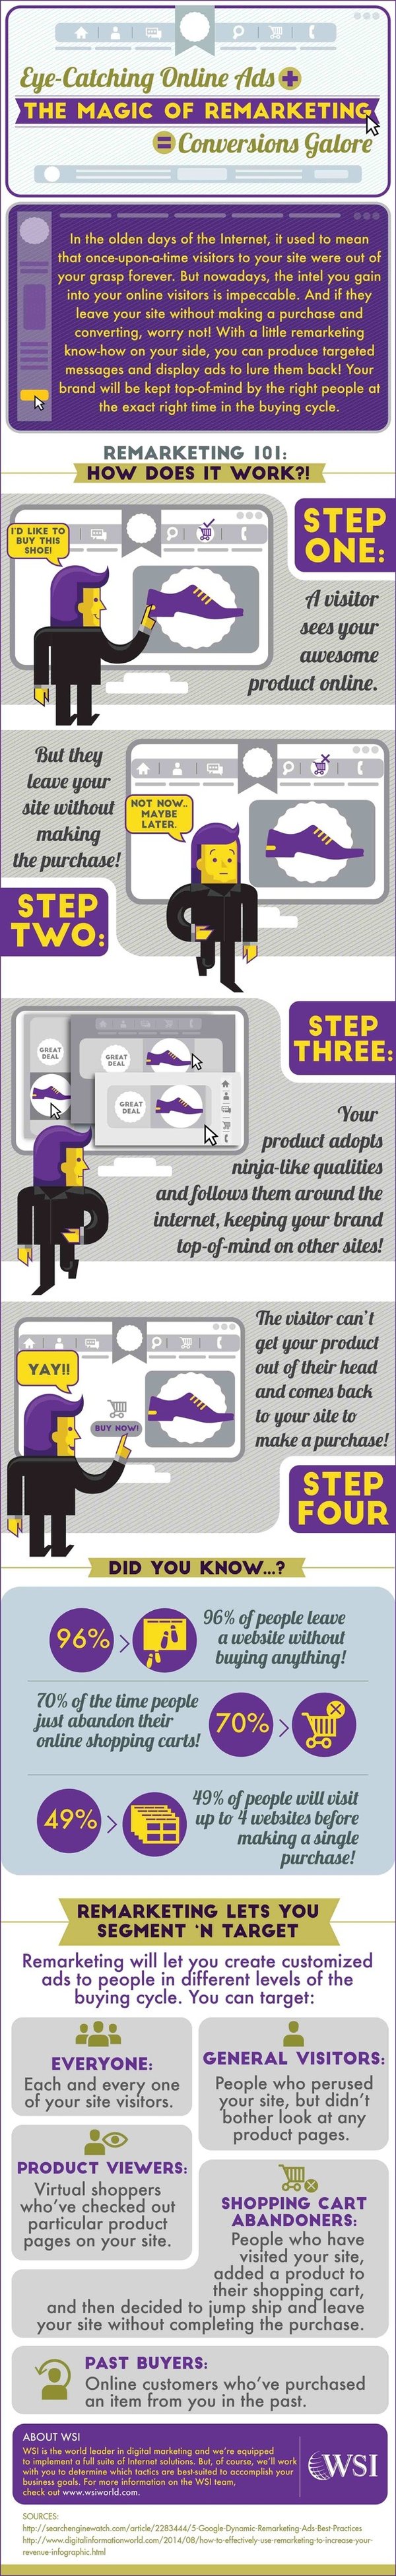 WSI World Blog - [INFOGRAPHIC] Online Ads + Remarketing = Conversions Galore Full Infographic